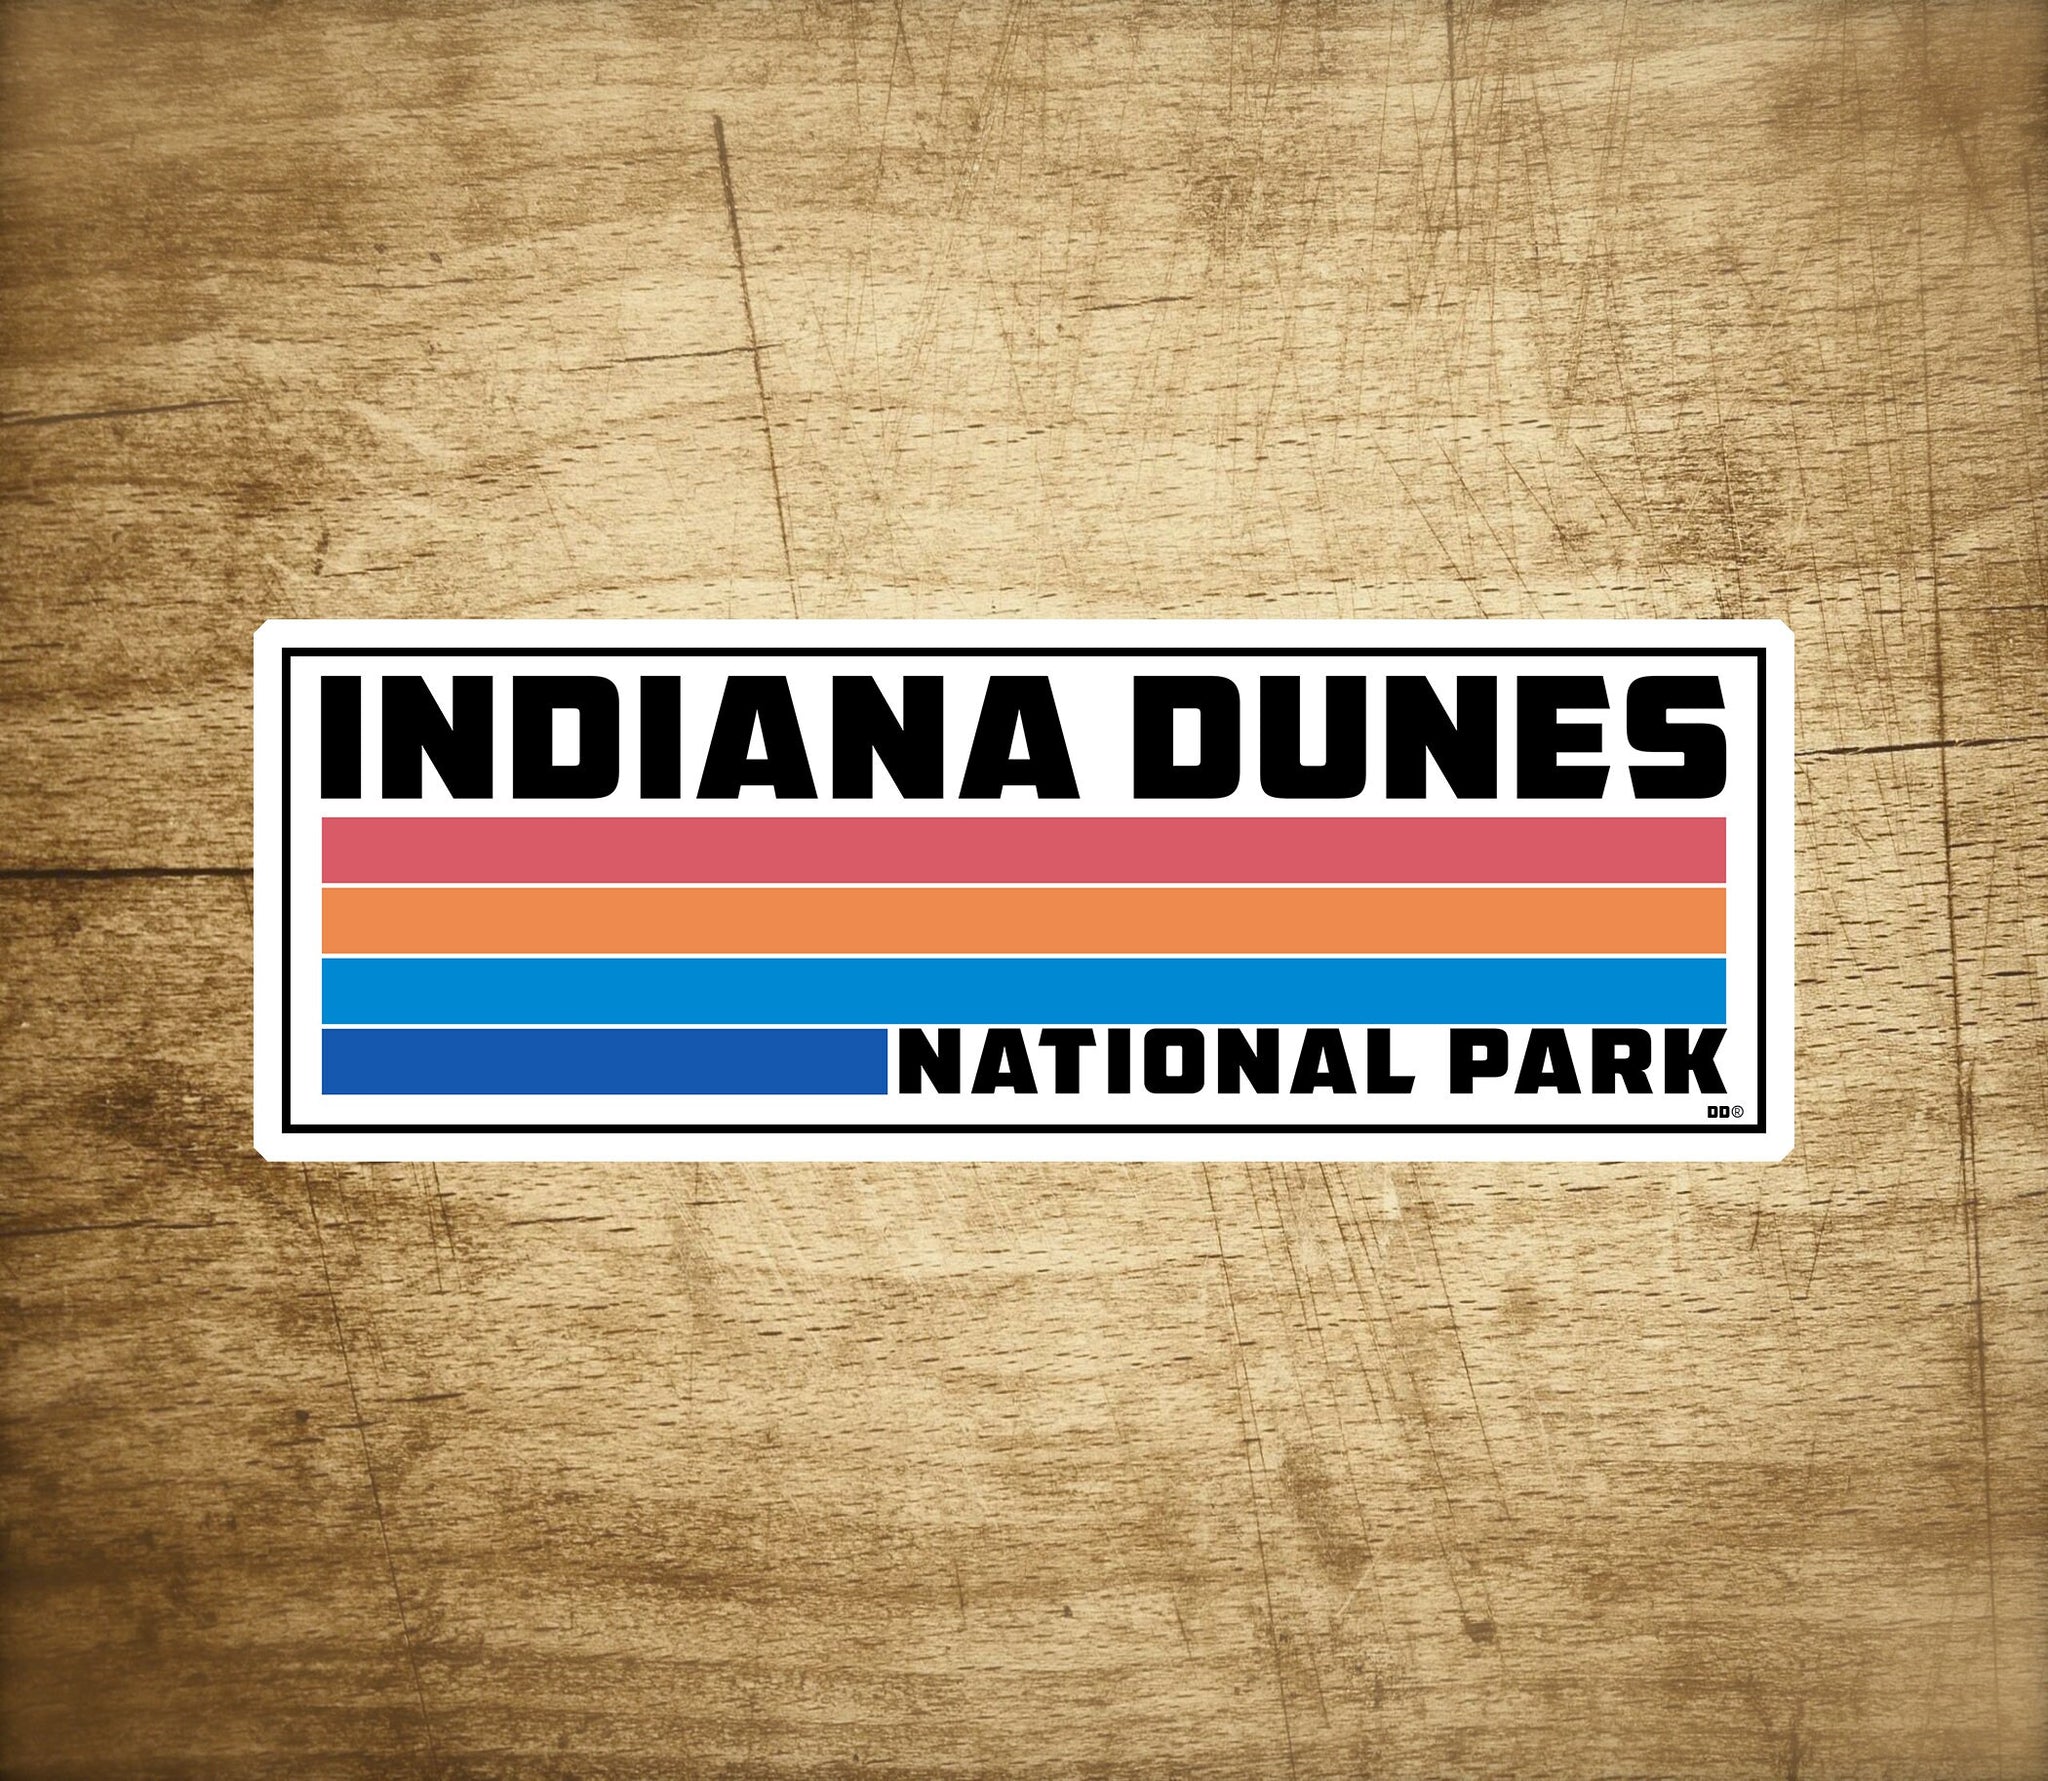 Indiana Dunes National Park Sticker Travel Decal 3.75" X 1.2"